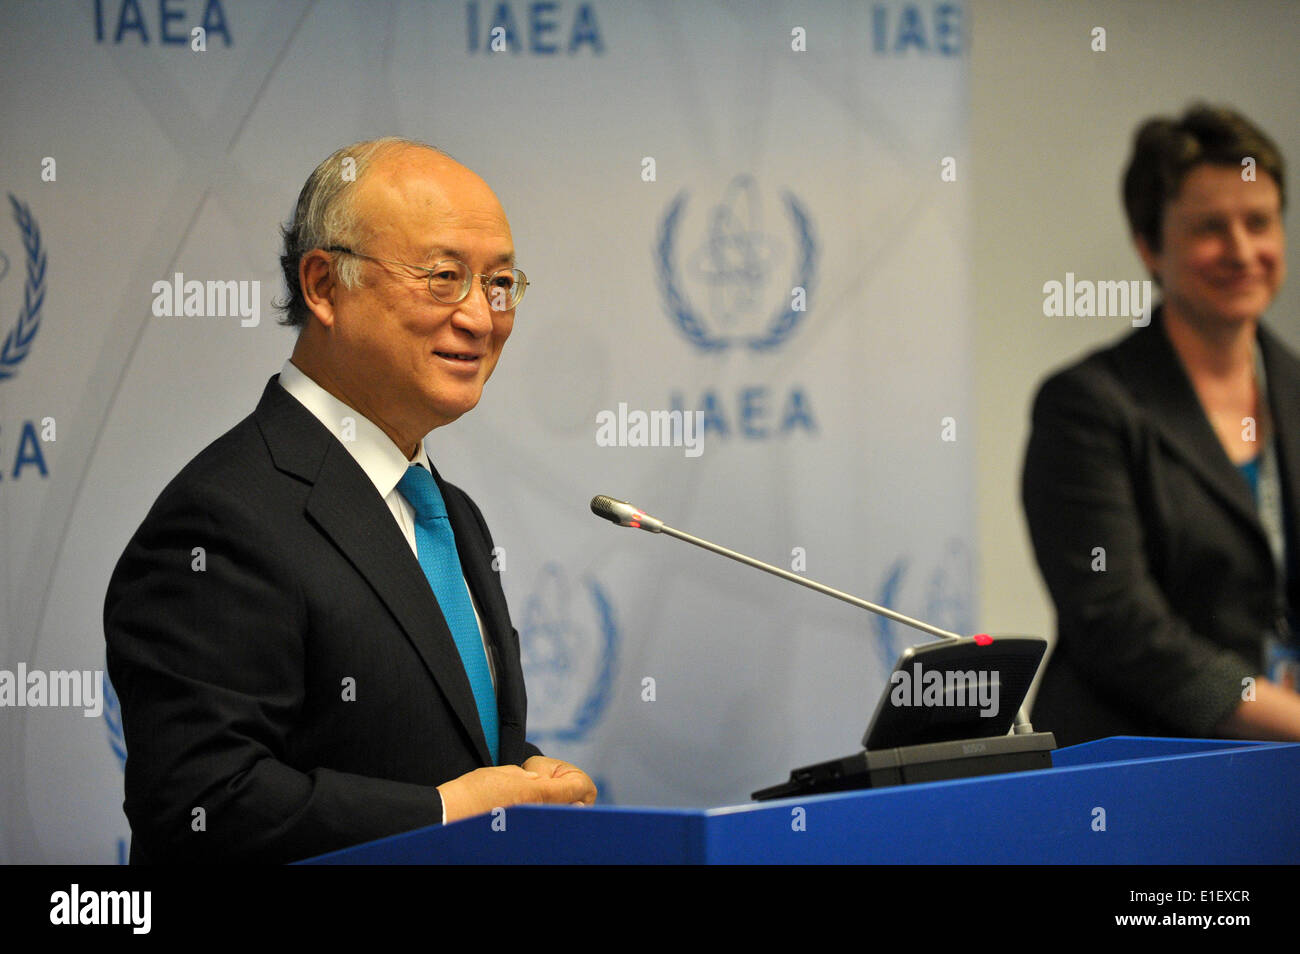 Vienna, Austria. 2nd June, 2014. Yukiya Amano, director general of the International Atomic Energy Agency (IAEA) attends a press conference after an IAEA's board meeting in Vienna, Austria, June 2, 2014. The United Nations nuclear watchdog will take time before pronouncing its assessment on Tehran's disputed nuclear program, the chief said on Monday. © Qian Yi/Xinhua/Alamy Live News Stock Photo